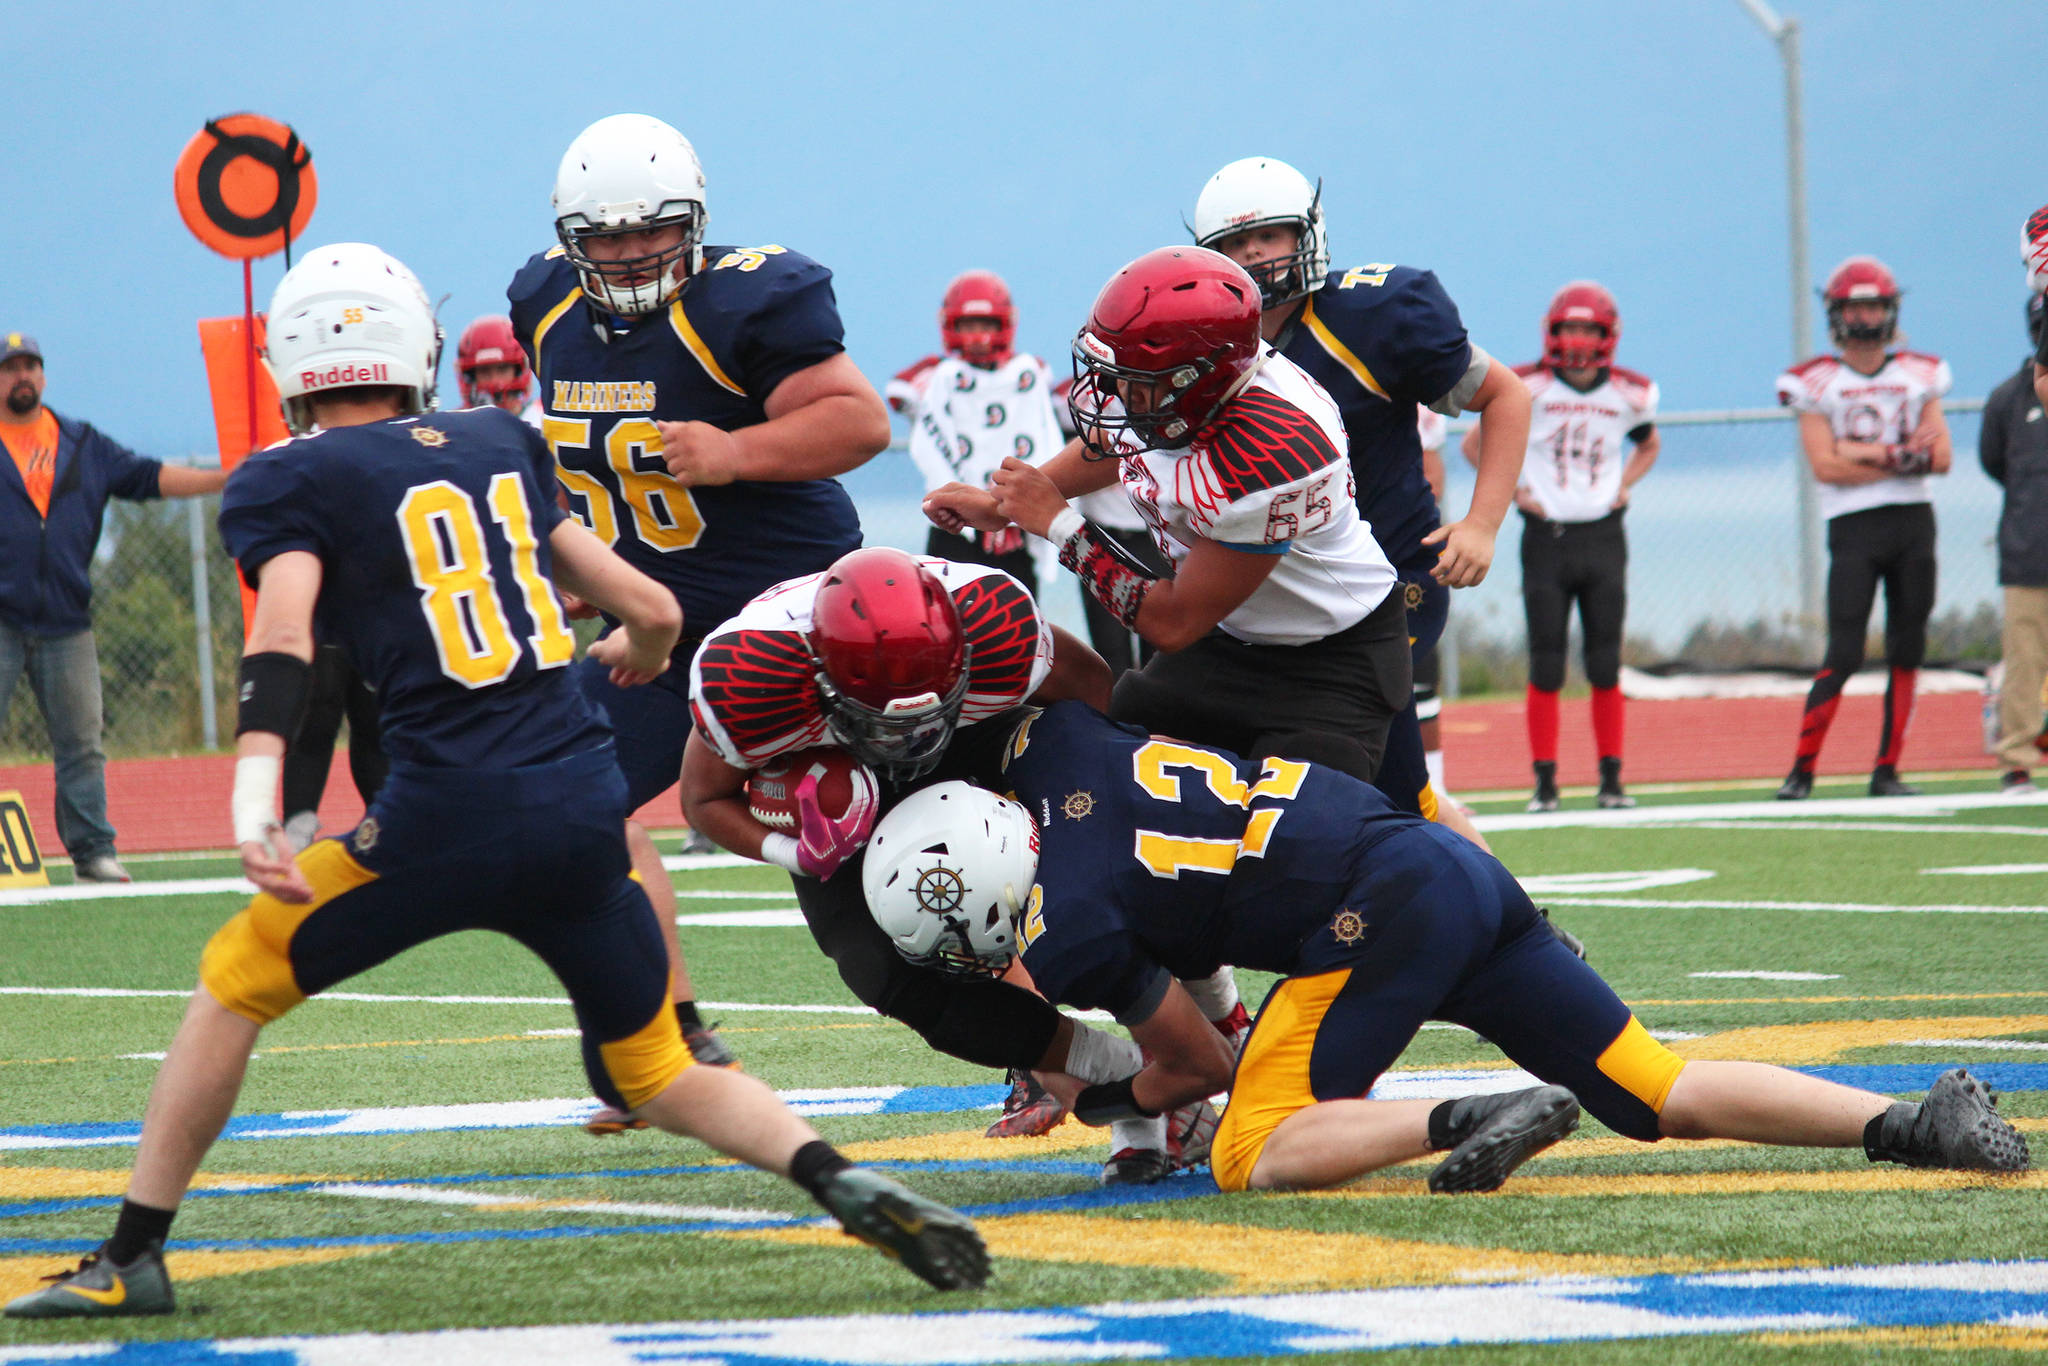 Homer quarterback Anthony Kalugin (12) tackles Houston’s Kennedy Fono during a Friday, Sept. 6, 2019 football game between the two teams on the Mariner field in Homer, Alaska. (Photo by Megan Pacer/Homer News)